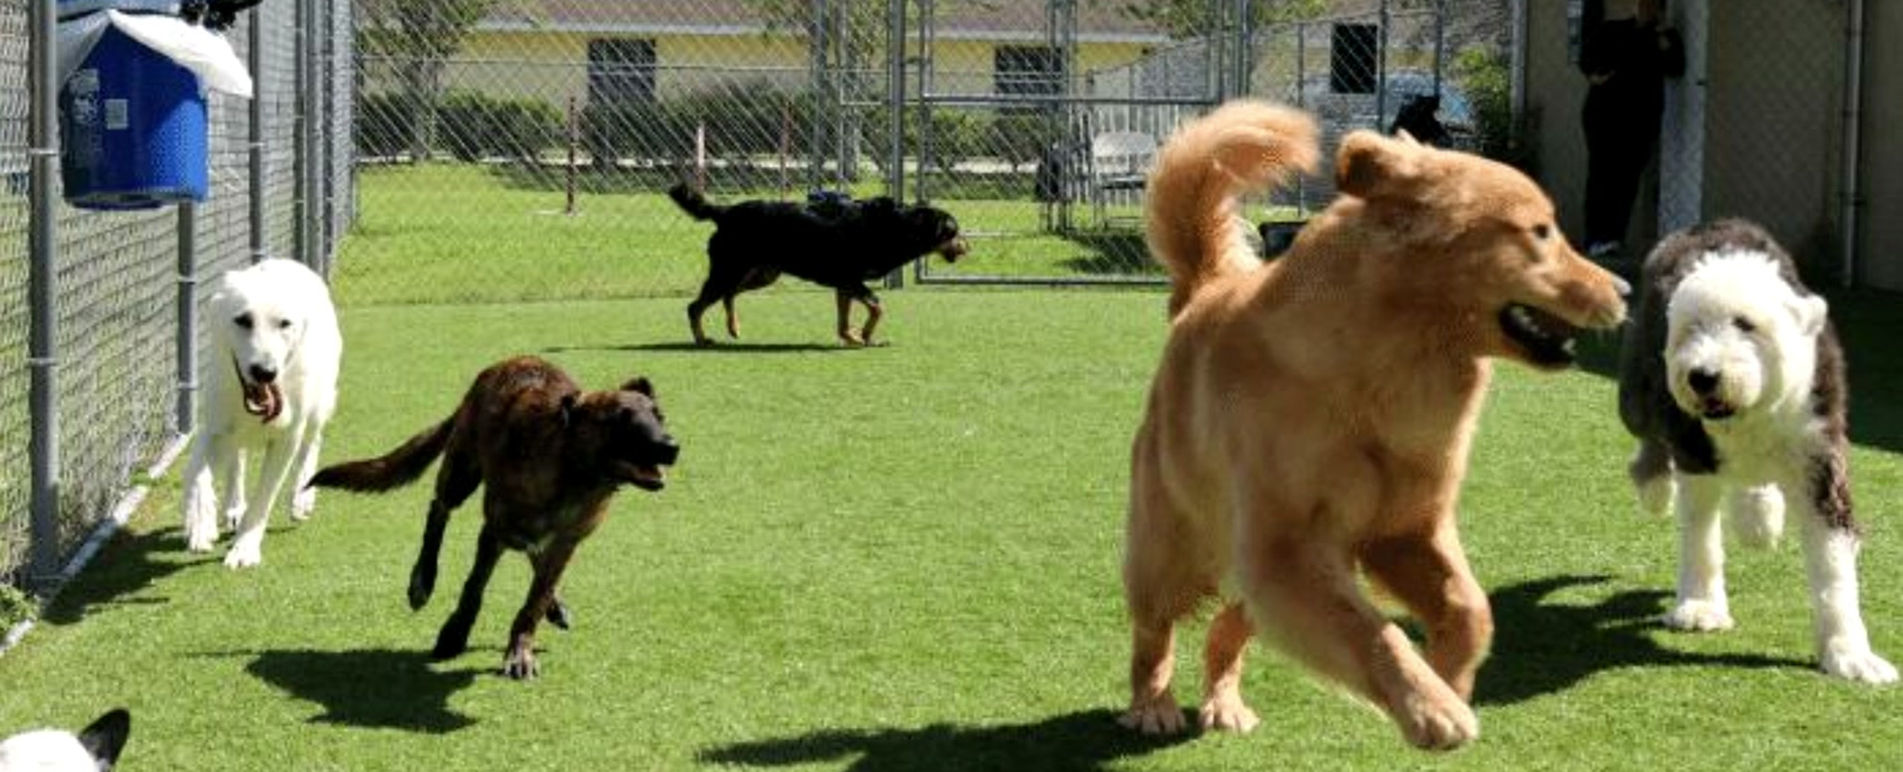 Dogs play in a gated grassy area